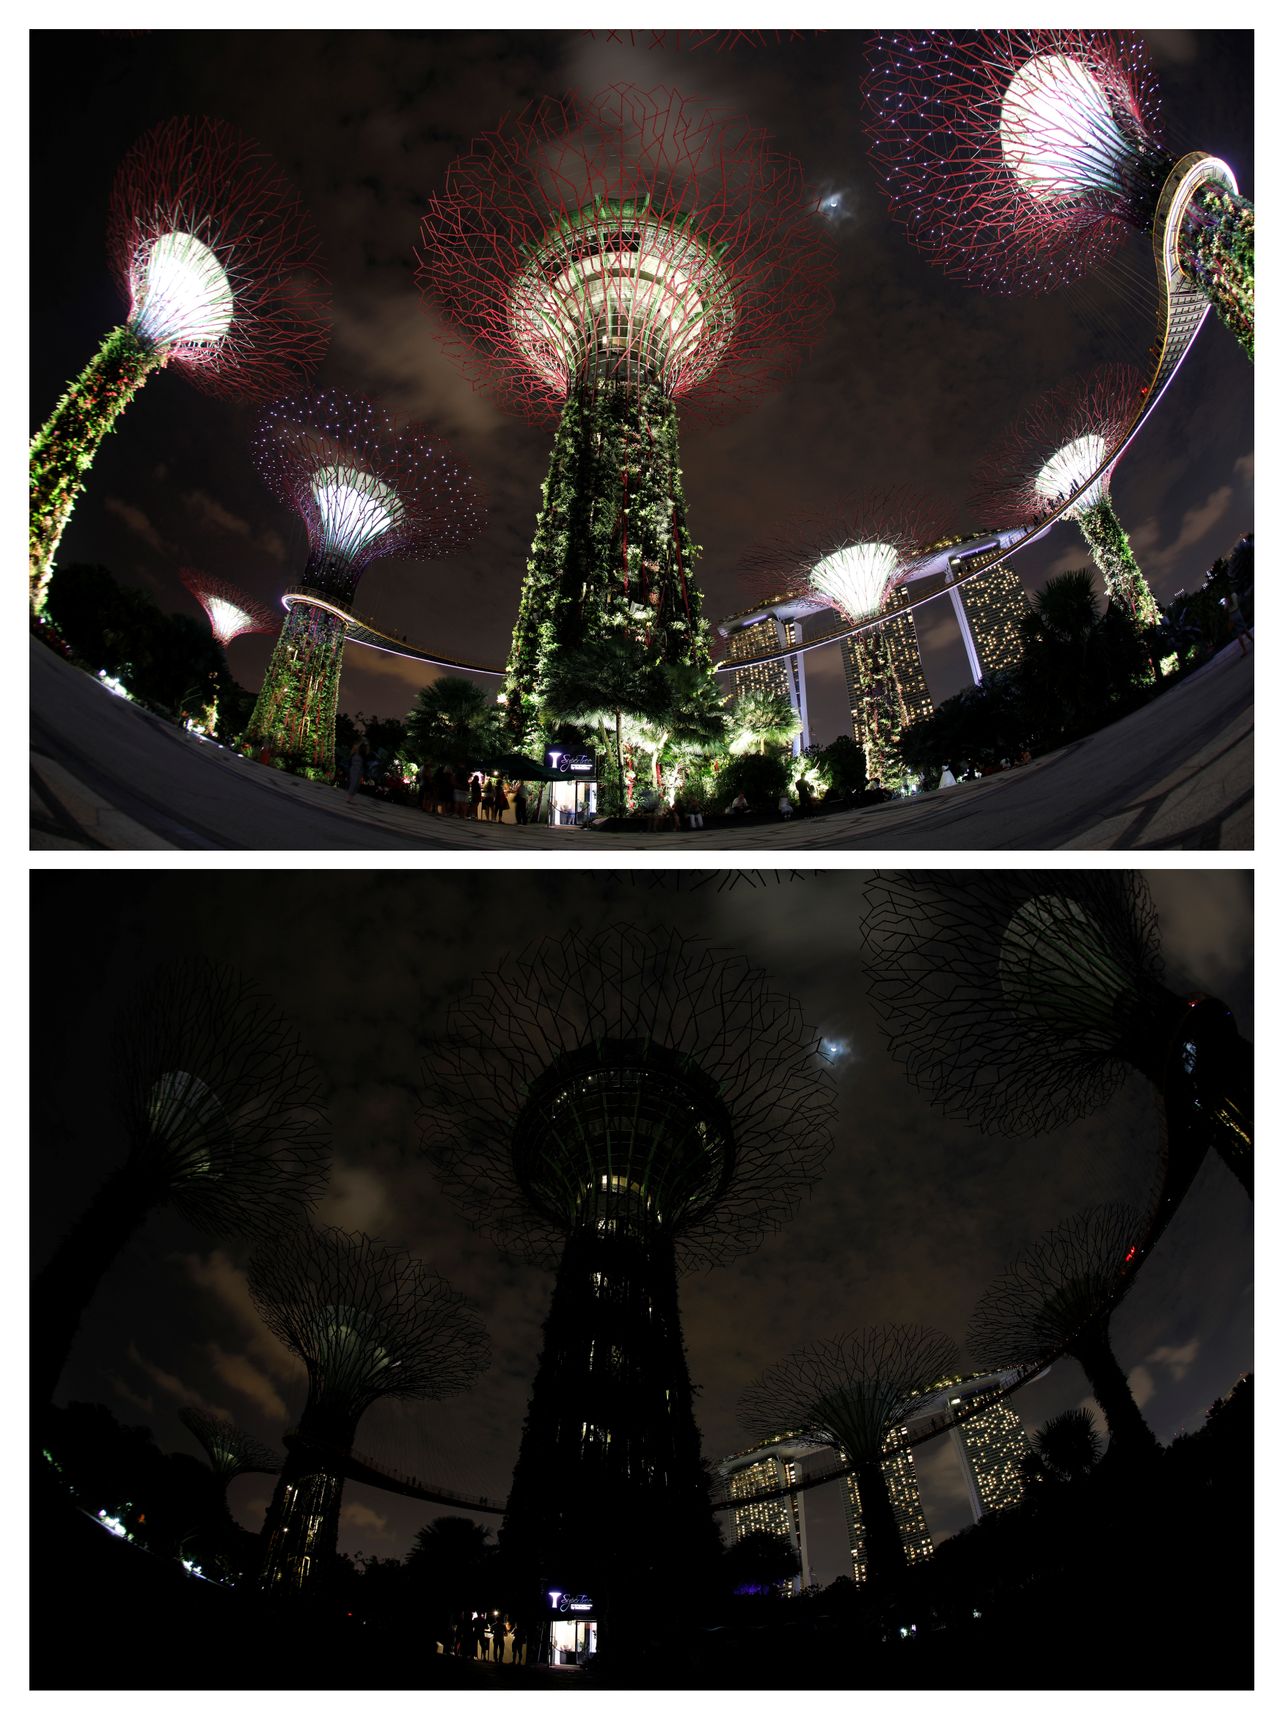 Giant concrete tree-like structures called 'Supertrees' are seen before (top) and after the lights were dimmed to mark Earth Hour at Singapore's Gardens by the Bay in Singapore.